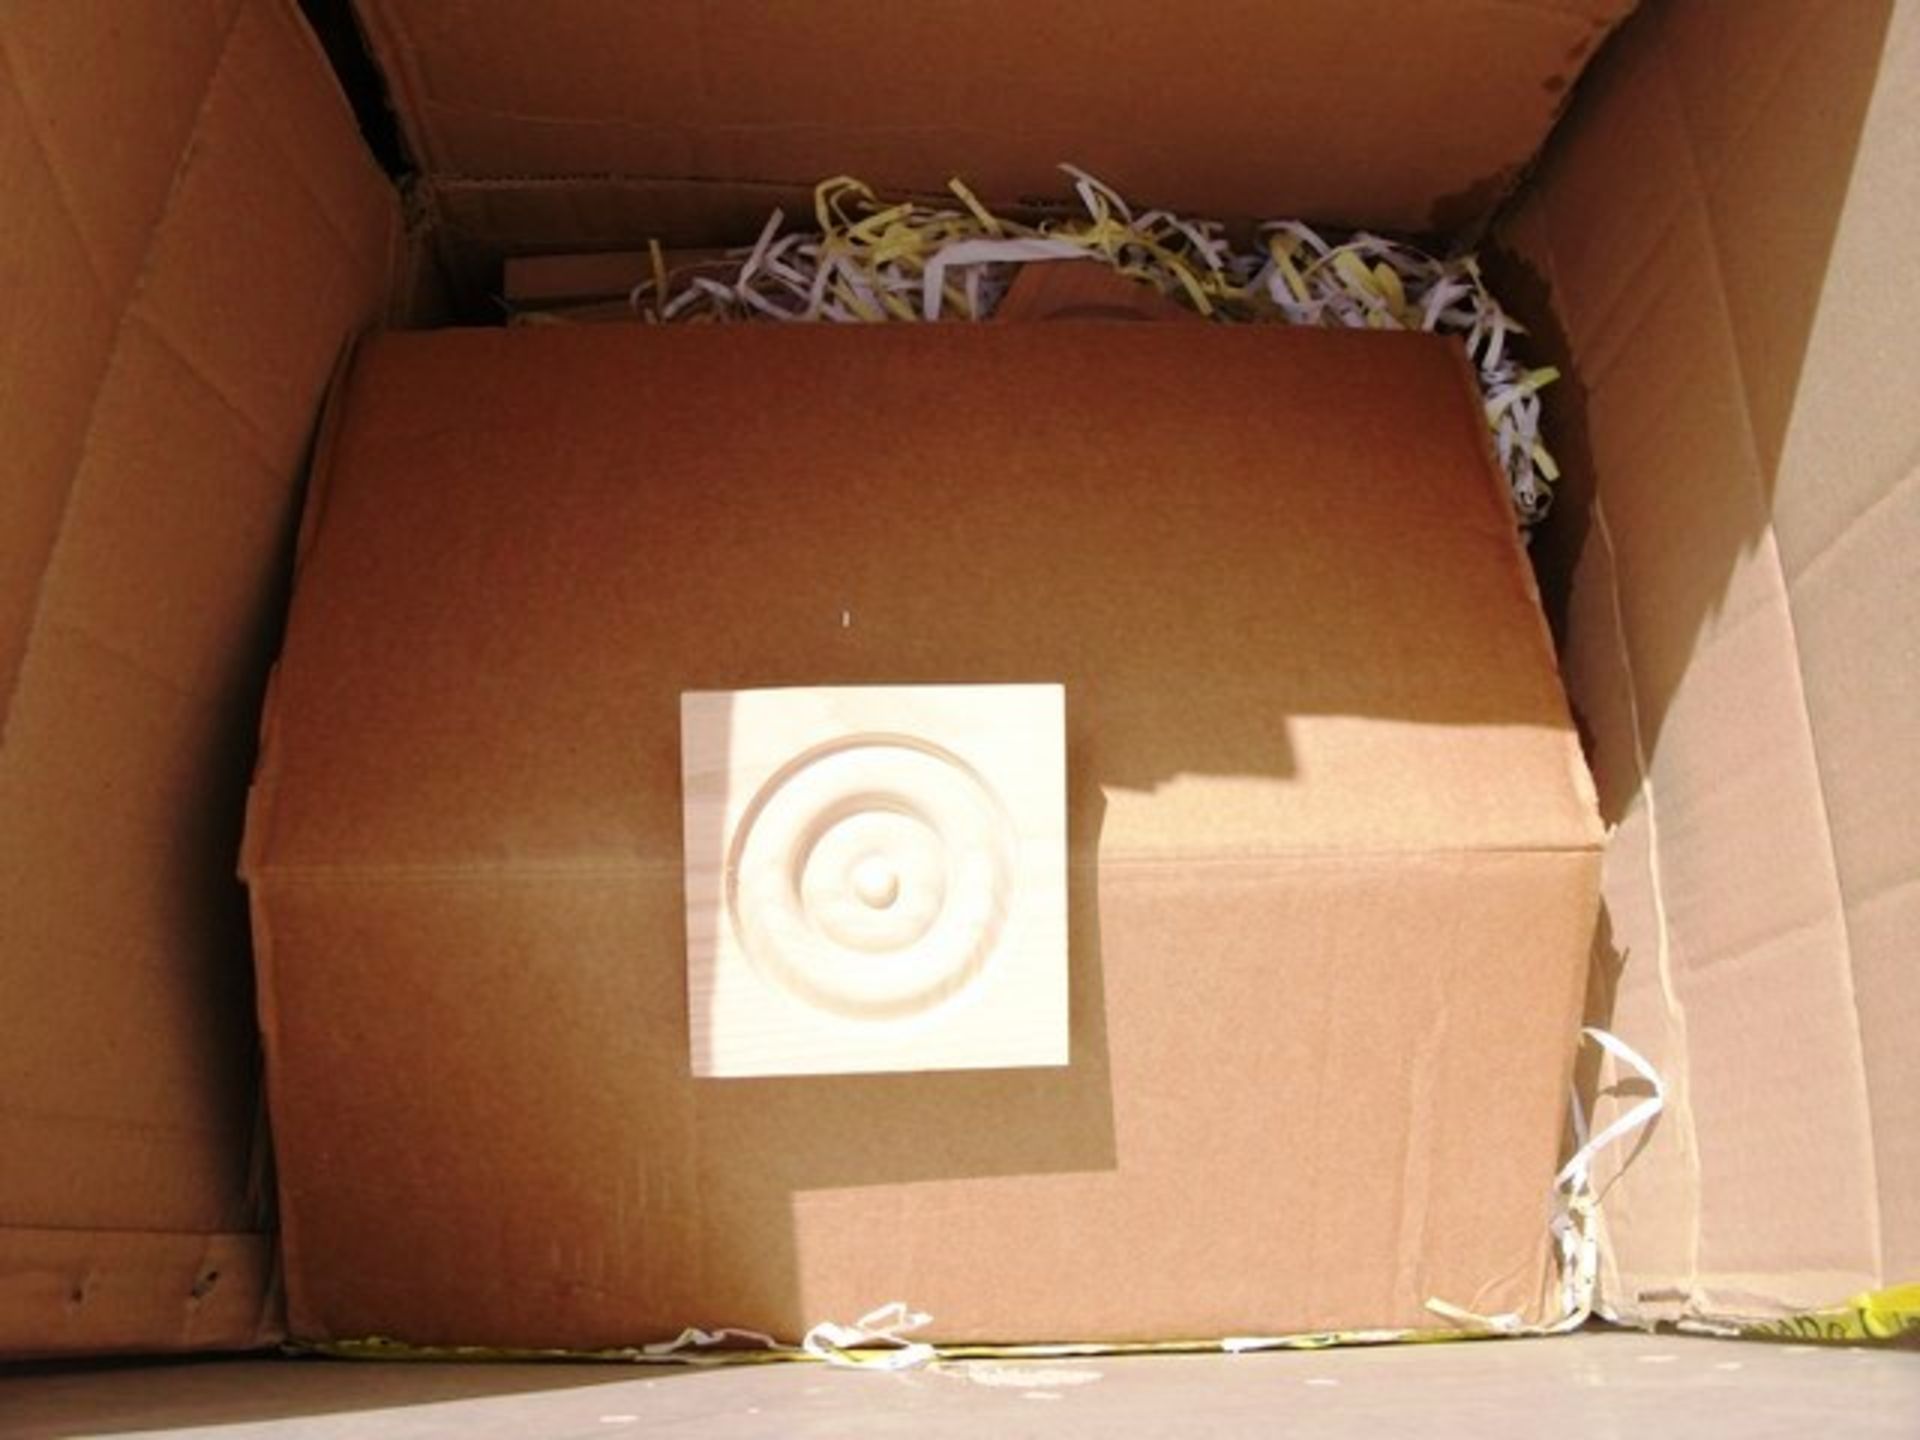 BOX WITH 4 PAIRS DUNLOP WELLINGTON BOOTS, CROMPTON BULBS, WOODEN TRIMS, PLASTIC TRAYS - Image 6 of 12